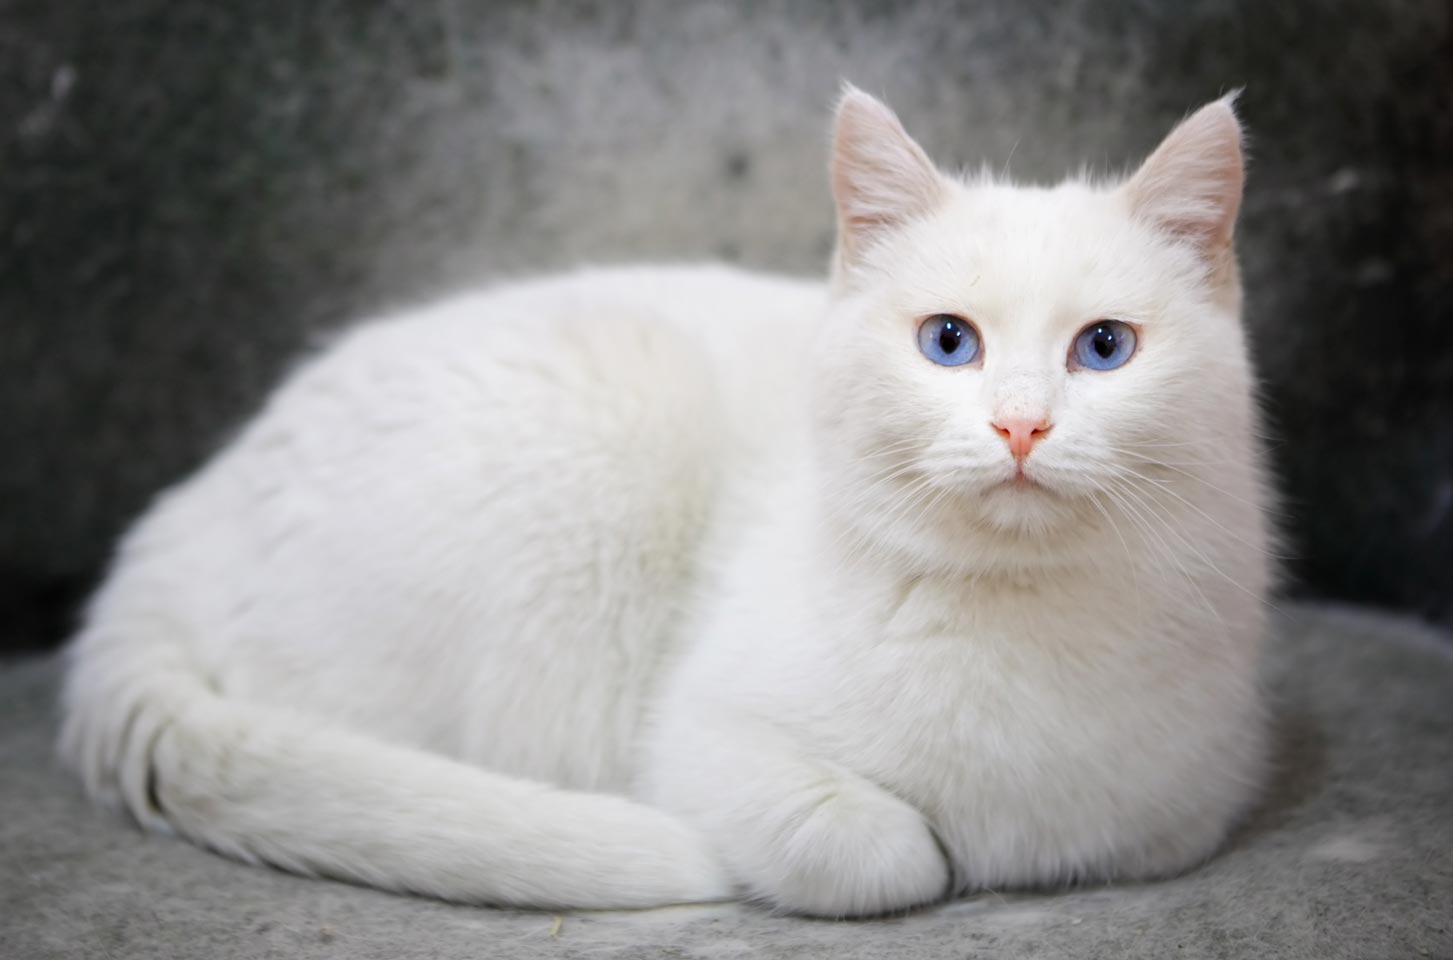 Learn how to help a deaf cat in your home.